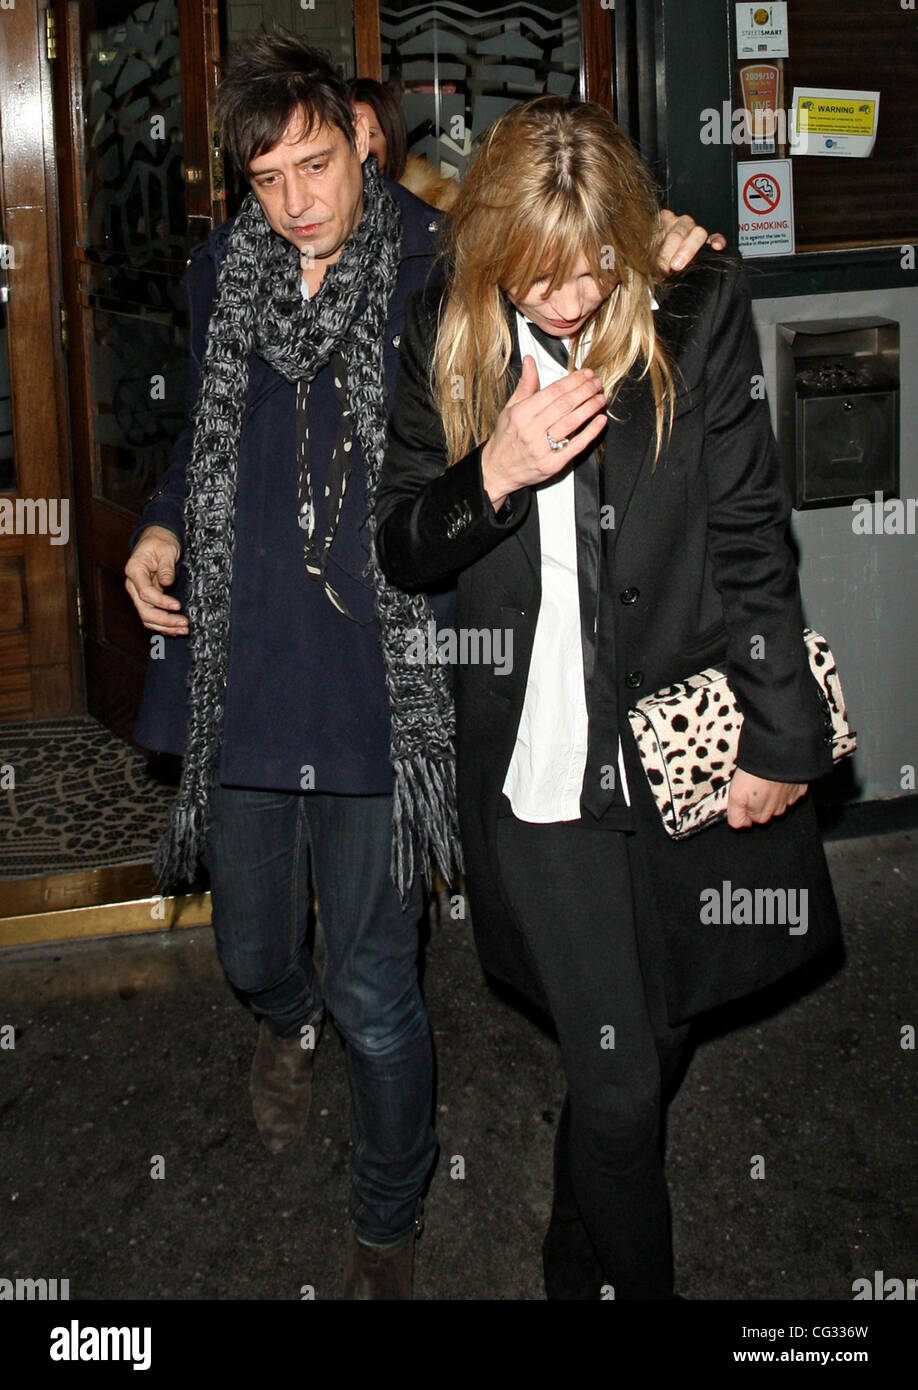 Kate Moss and Jamie Hince leaving Groucho Club at 3am, Kate arrived at 9.45pm and met Jamie inside. London, England - 14.12.10 Stock Photo